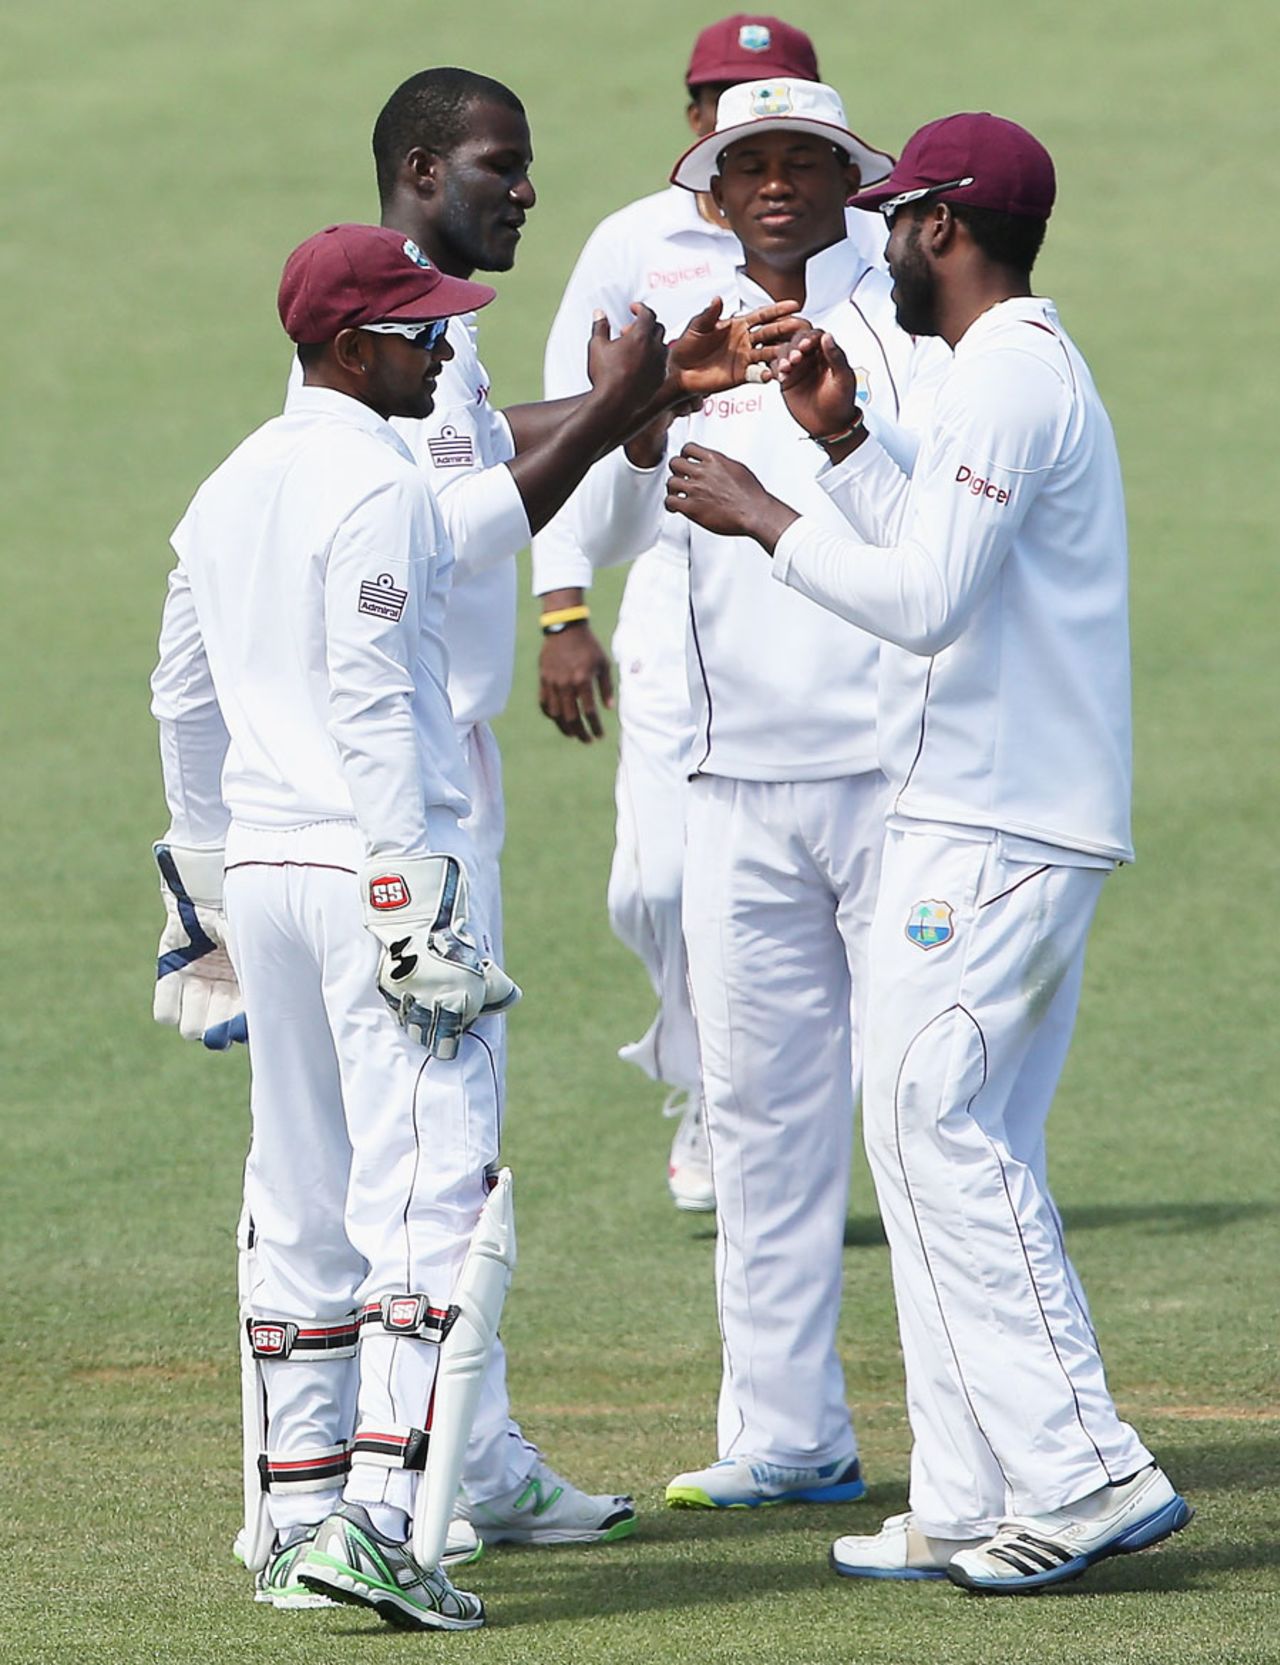 The West Indians celebrate a wicket, New Zealand v West Indies, 3rd Test, Hamilton, 4th day, December 22, 2013